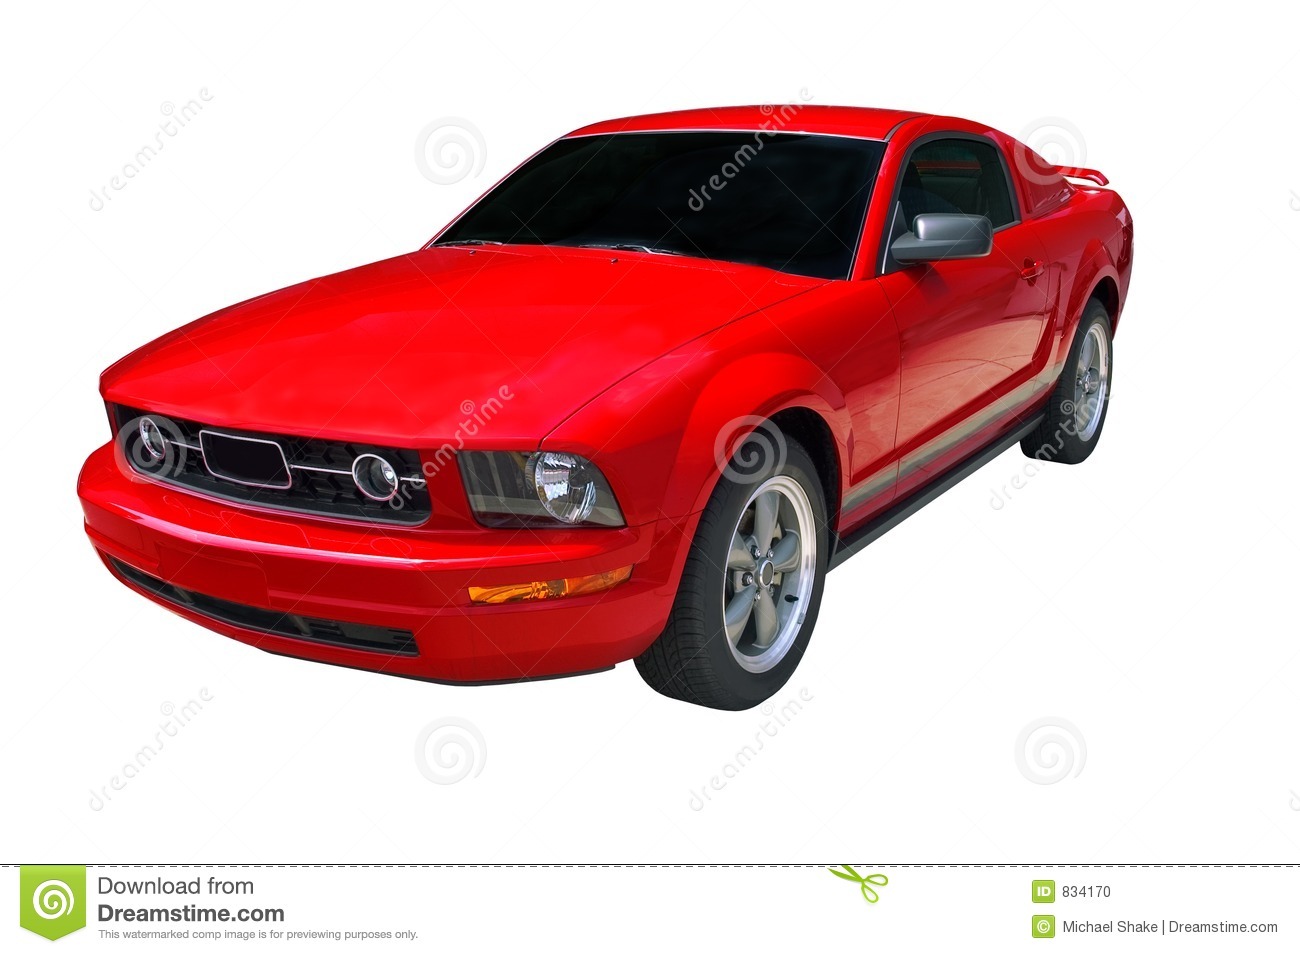 Red Mustang Sports Car Stock Photo   Image  834170